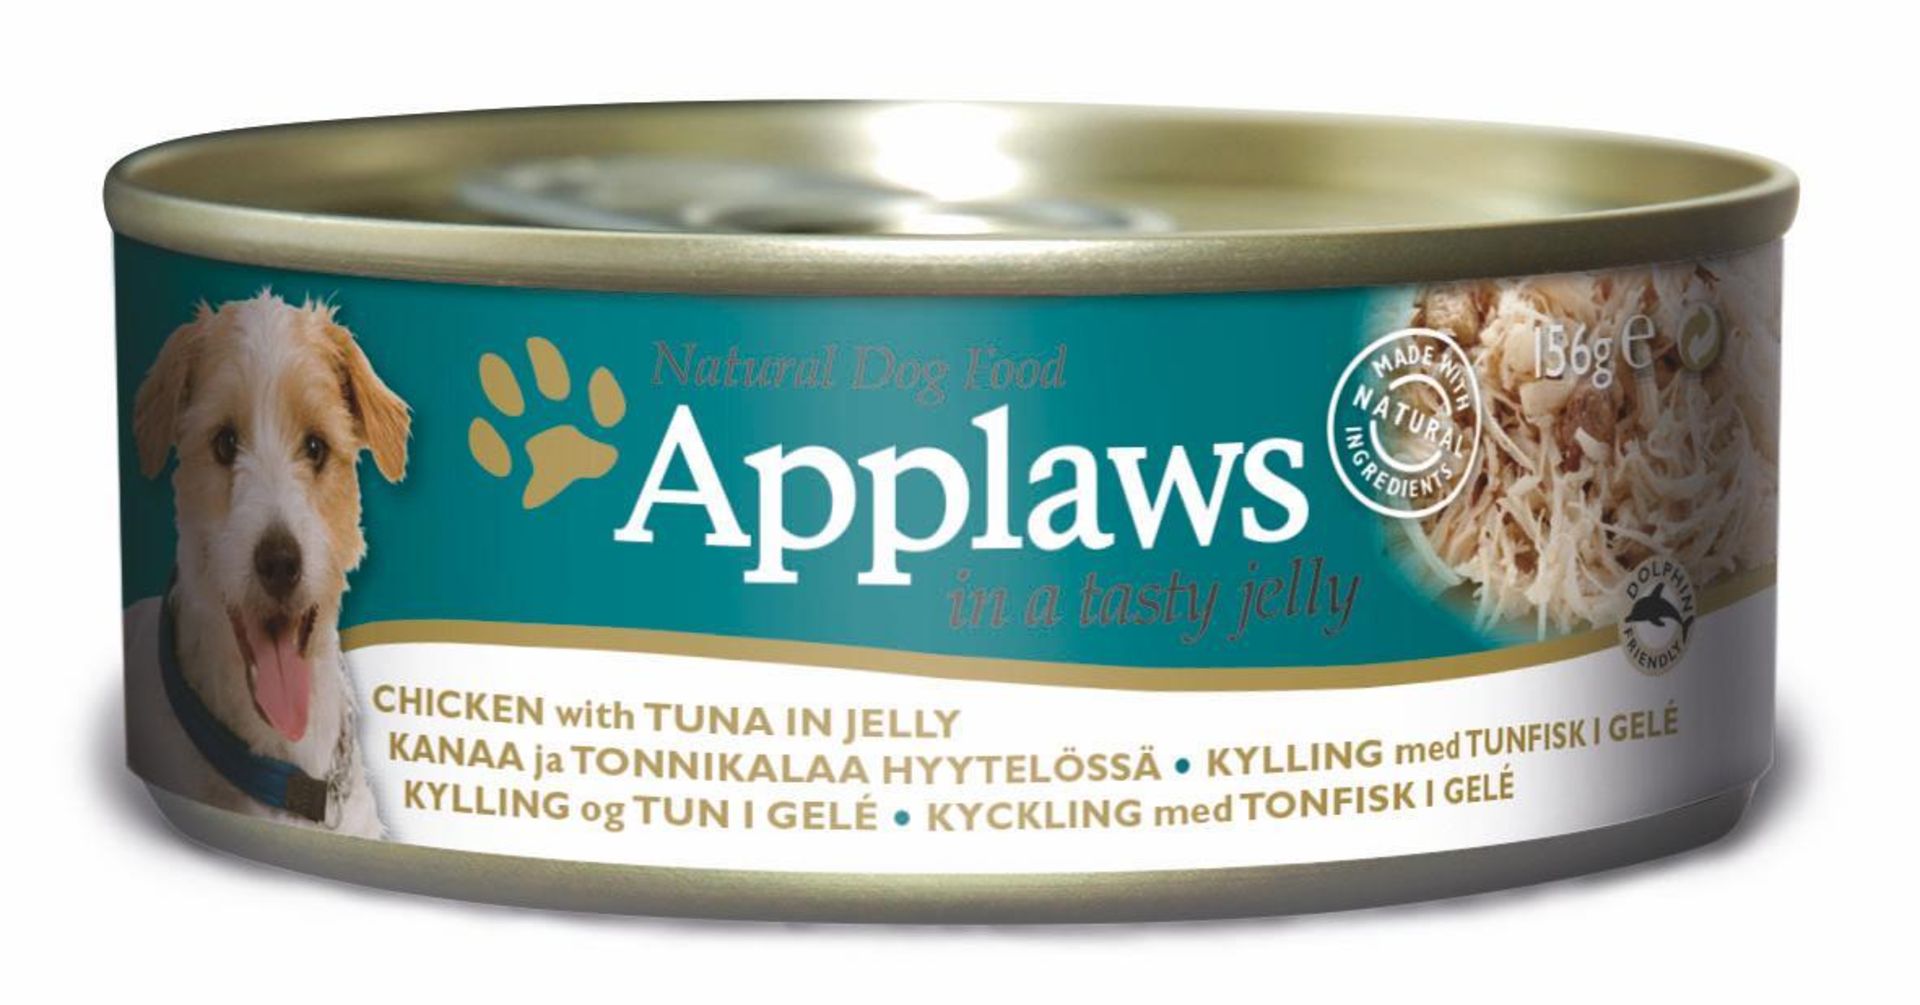 Applaws Dog Tin 12x(6x156g) Chicken with tuna in Jelly. 72 tins total. Full RRP £132 plus.